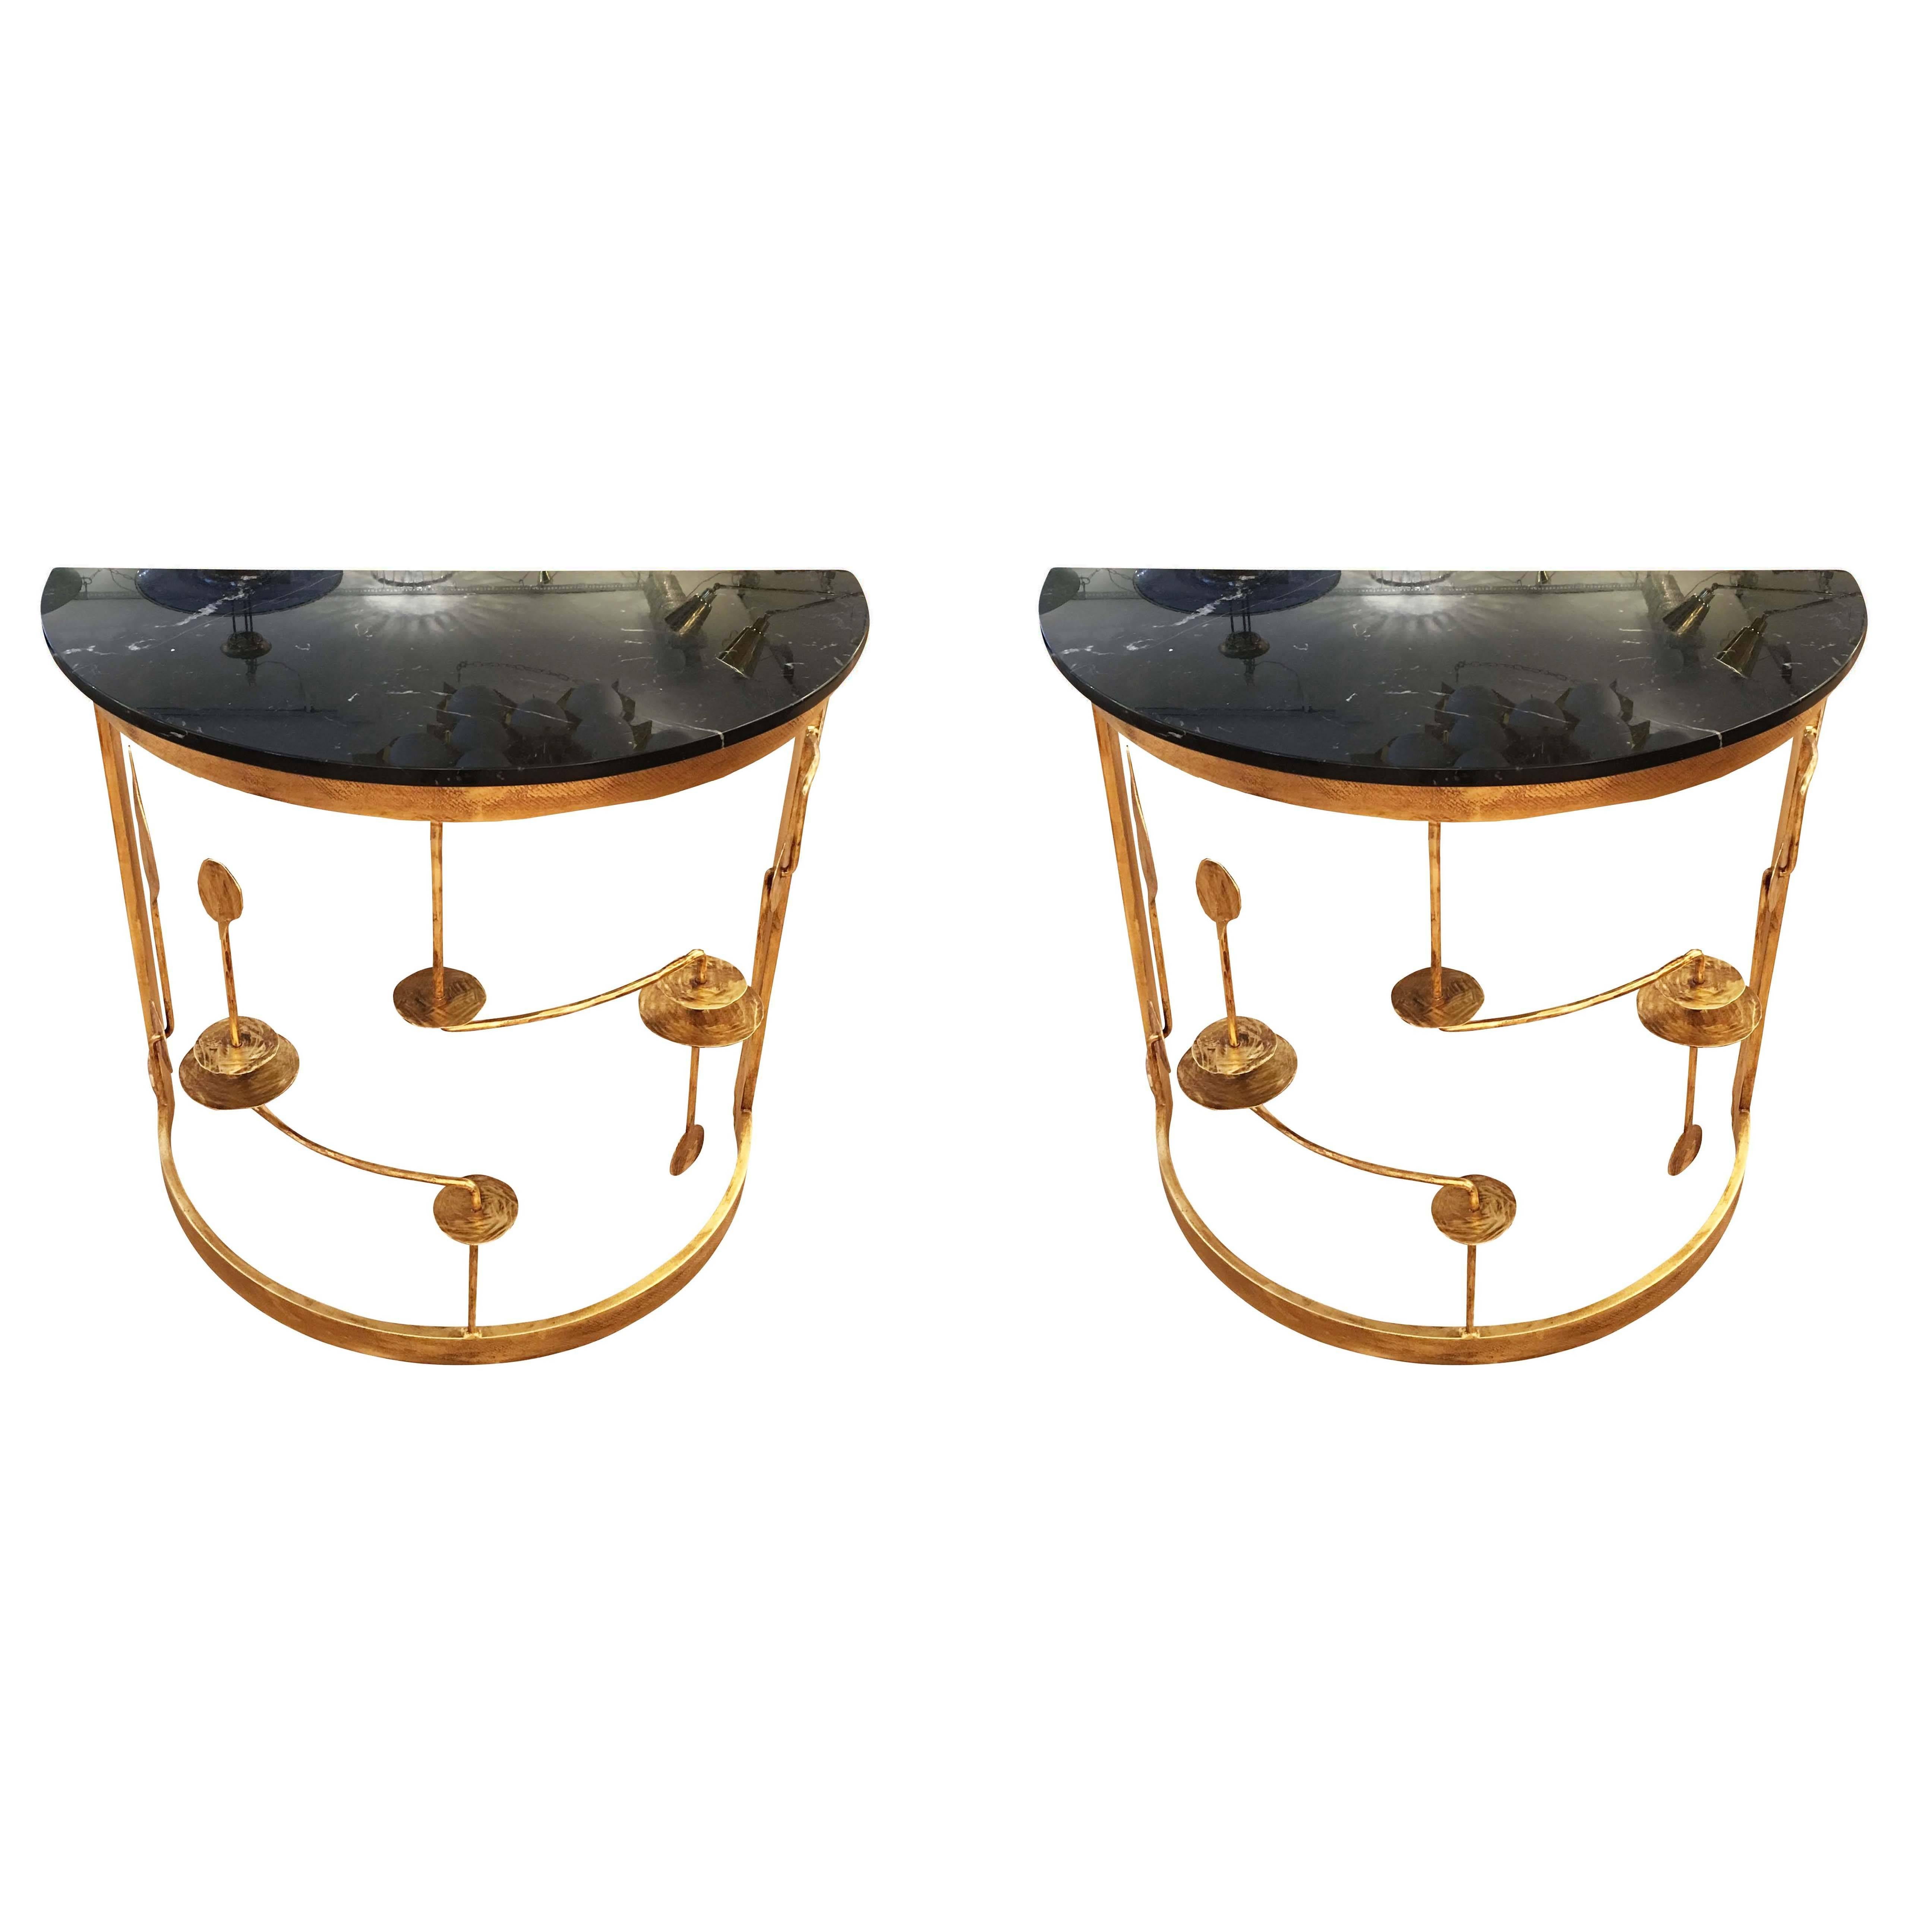 Pair of Gilded Demilune Consoles by Banci